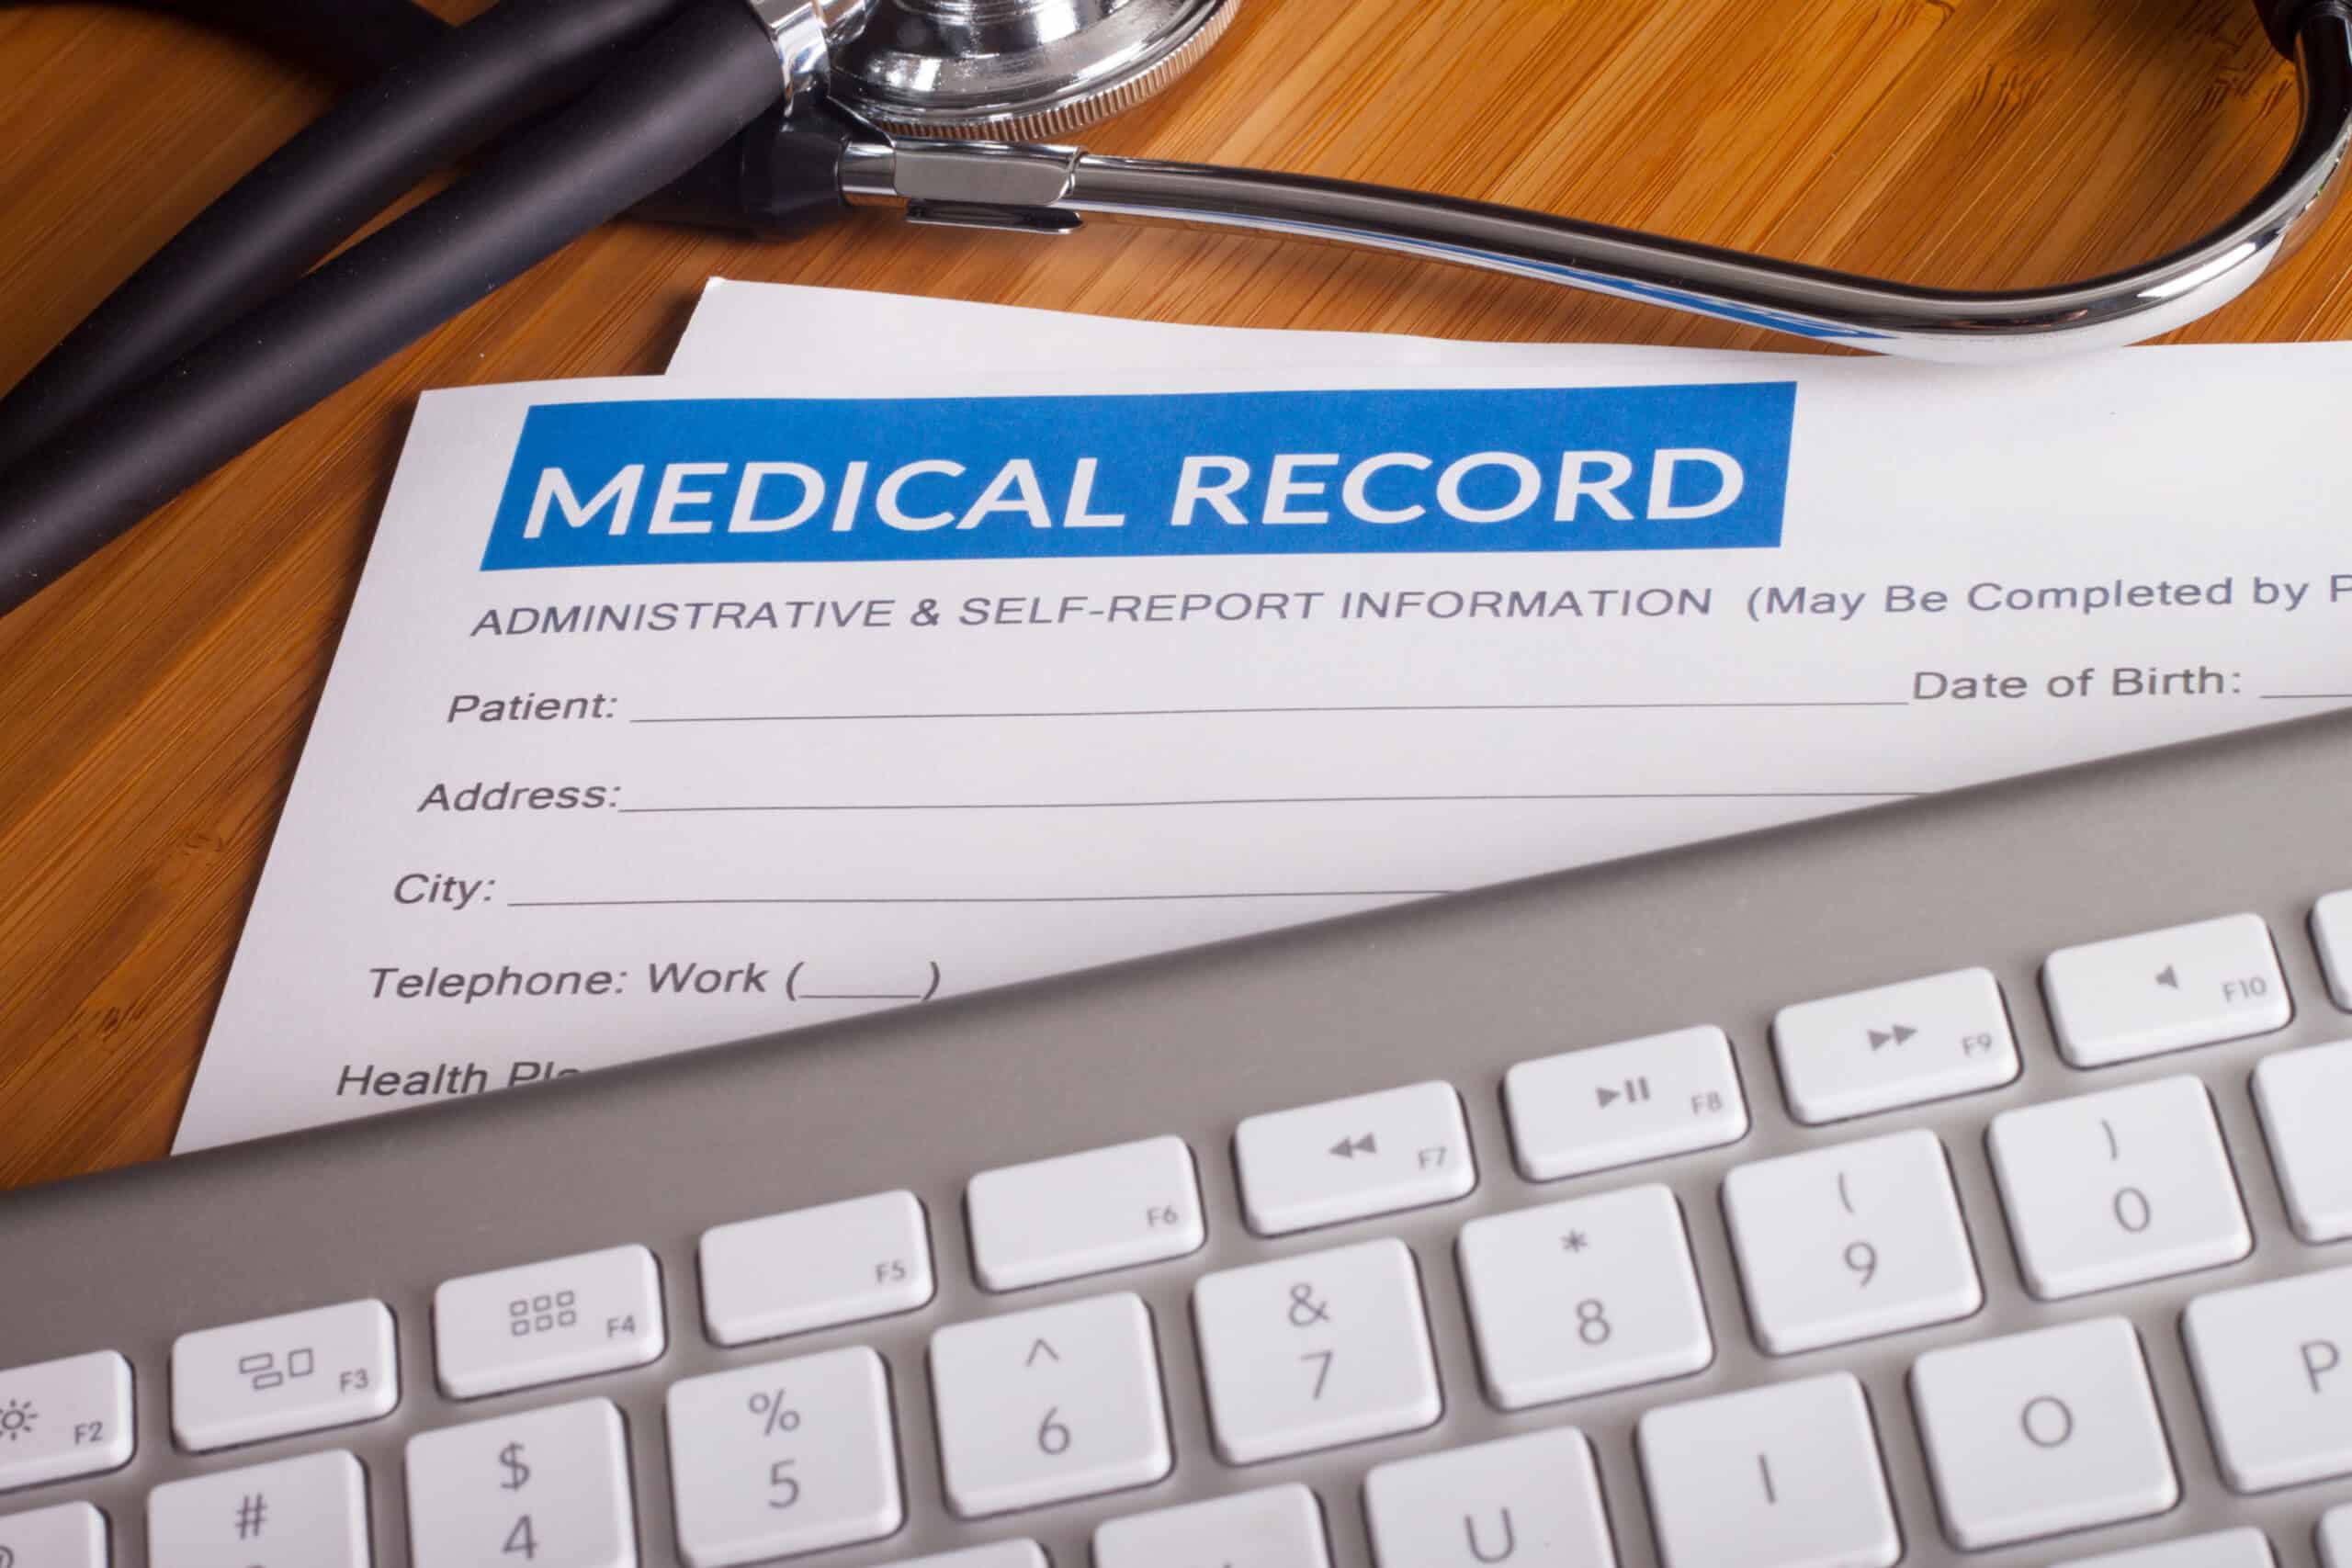 examples of falsifying medical records